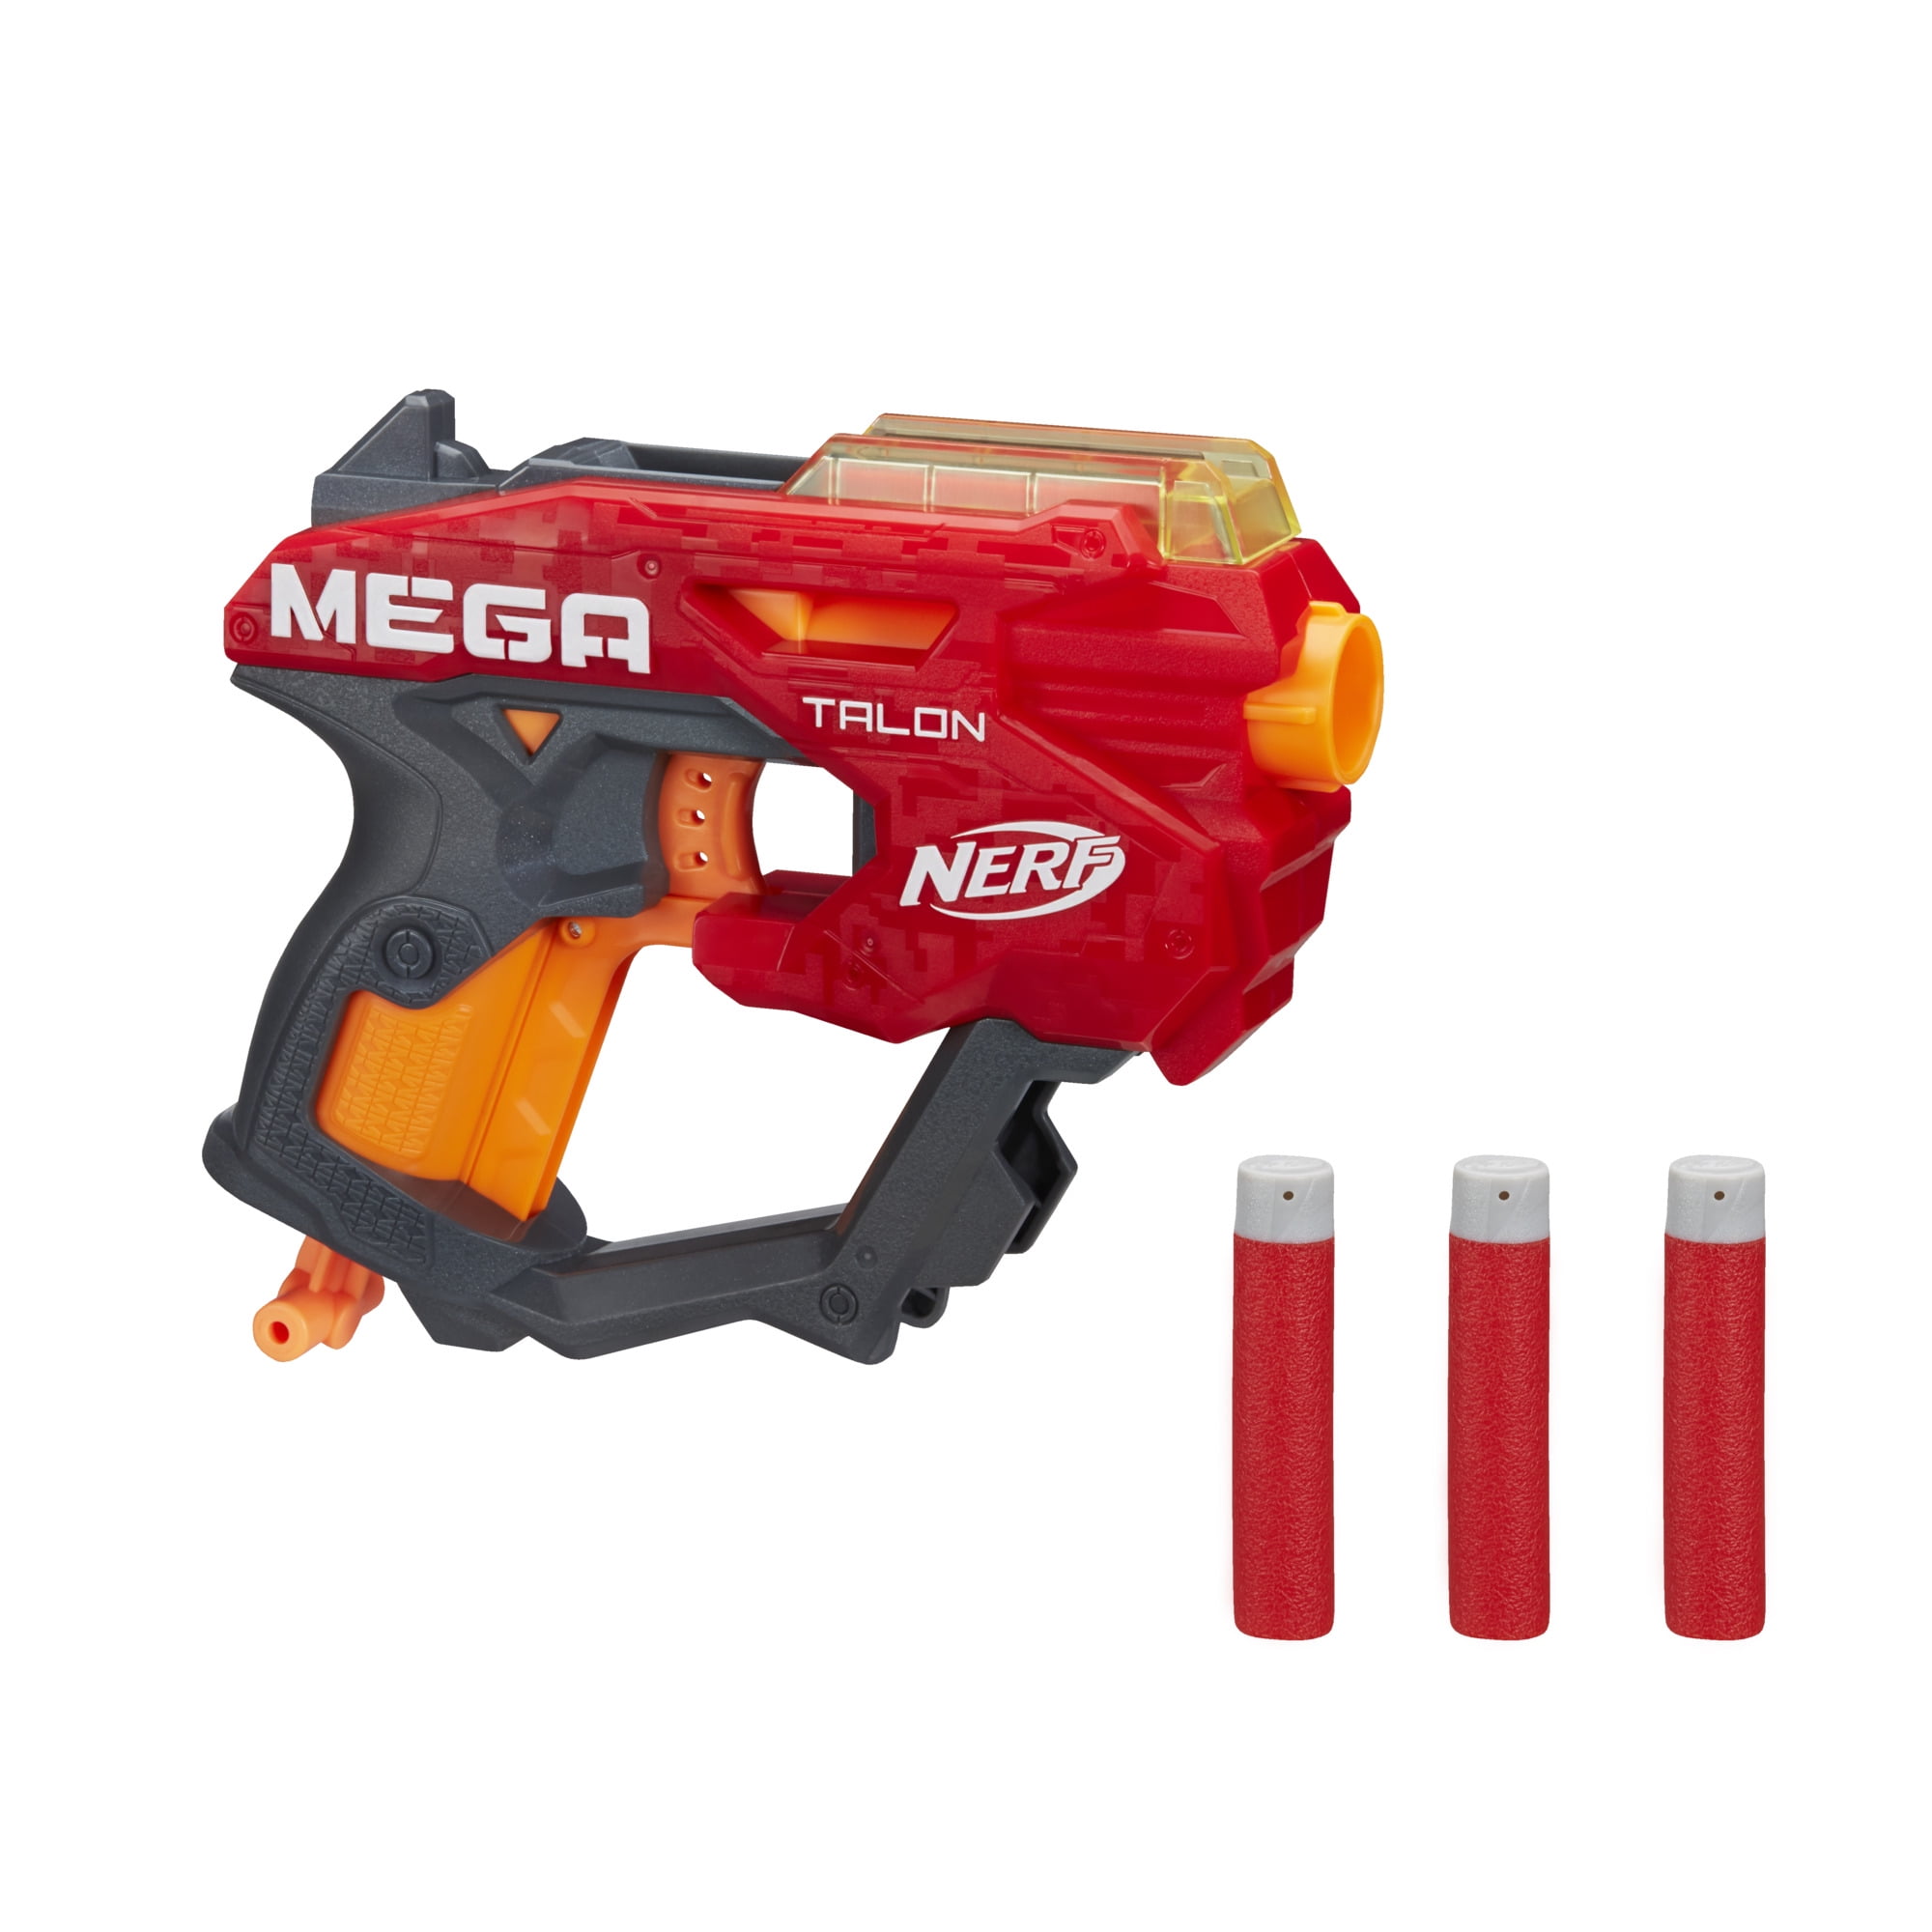 Nerf Talon Blaster, Includes 3 AccuStrike Nerf Mega for Ages 8 and Up - Walmart.com